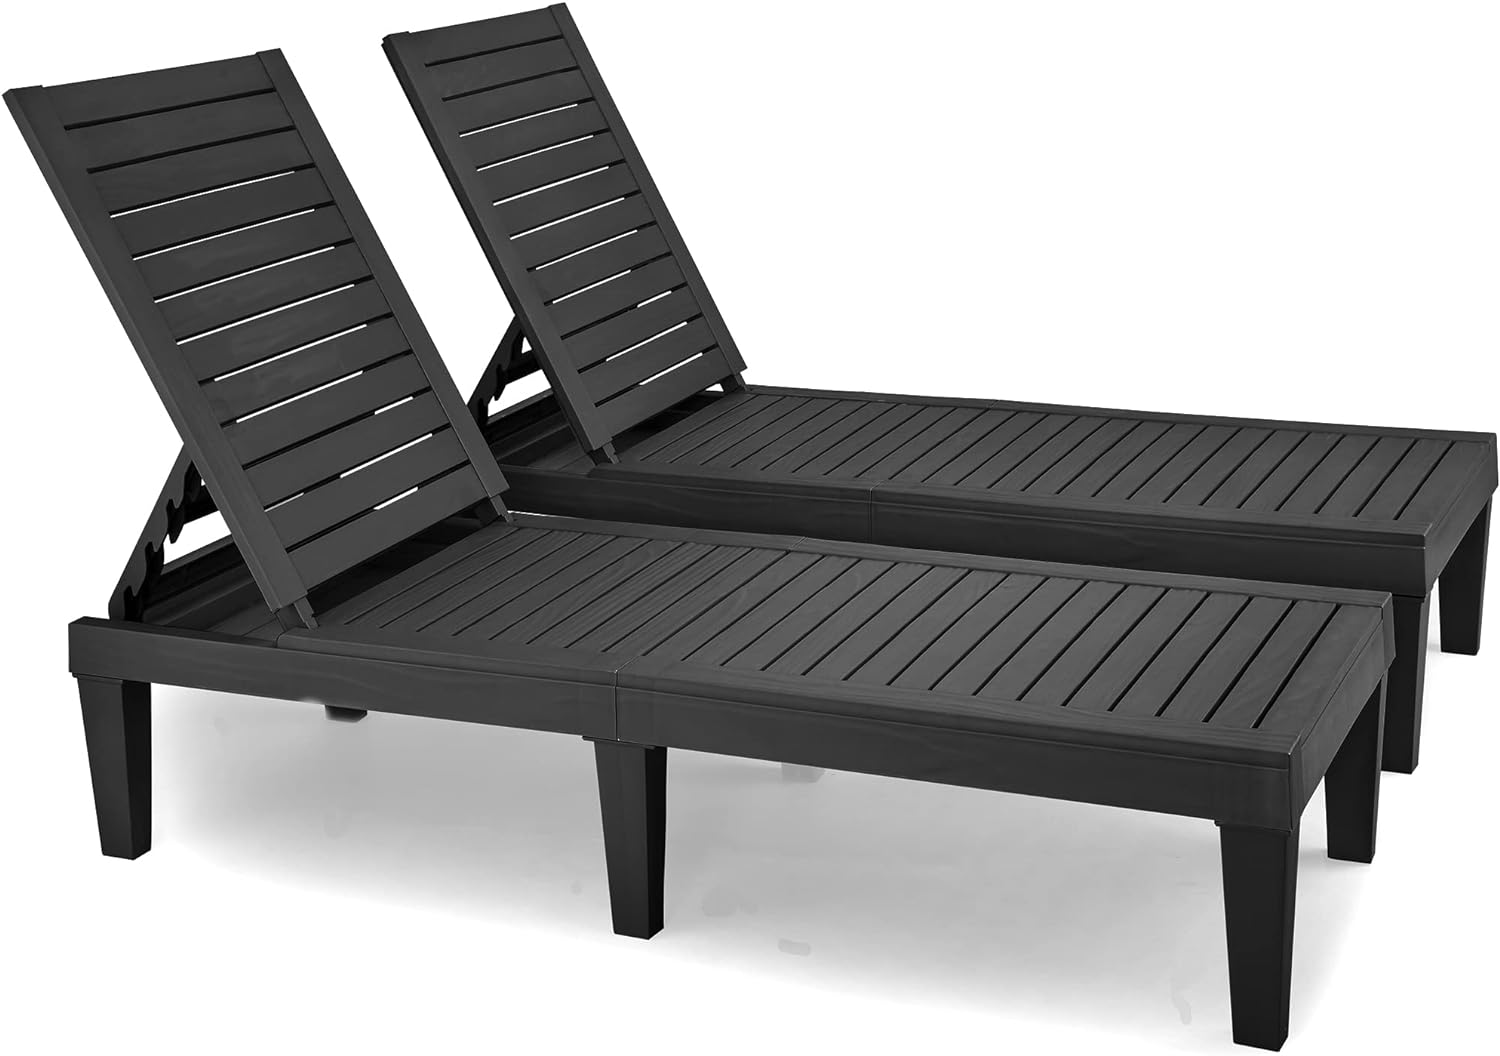 YITAHOME Chaise Outdoor Lounge Chairs with Adjustable Backrest, Sturdy Loungers for Patio & Poolside, Easy Assembly & Waterproof & Lightweight with 265lbs Weight Capacity, Set of 2, Black